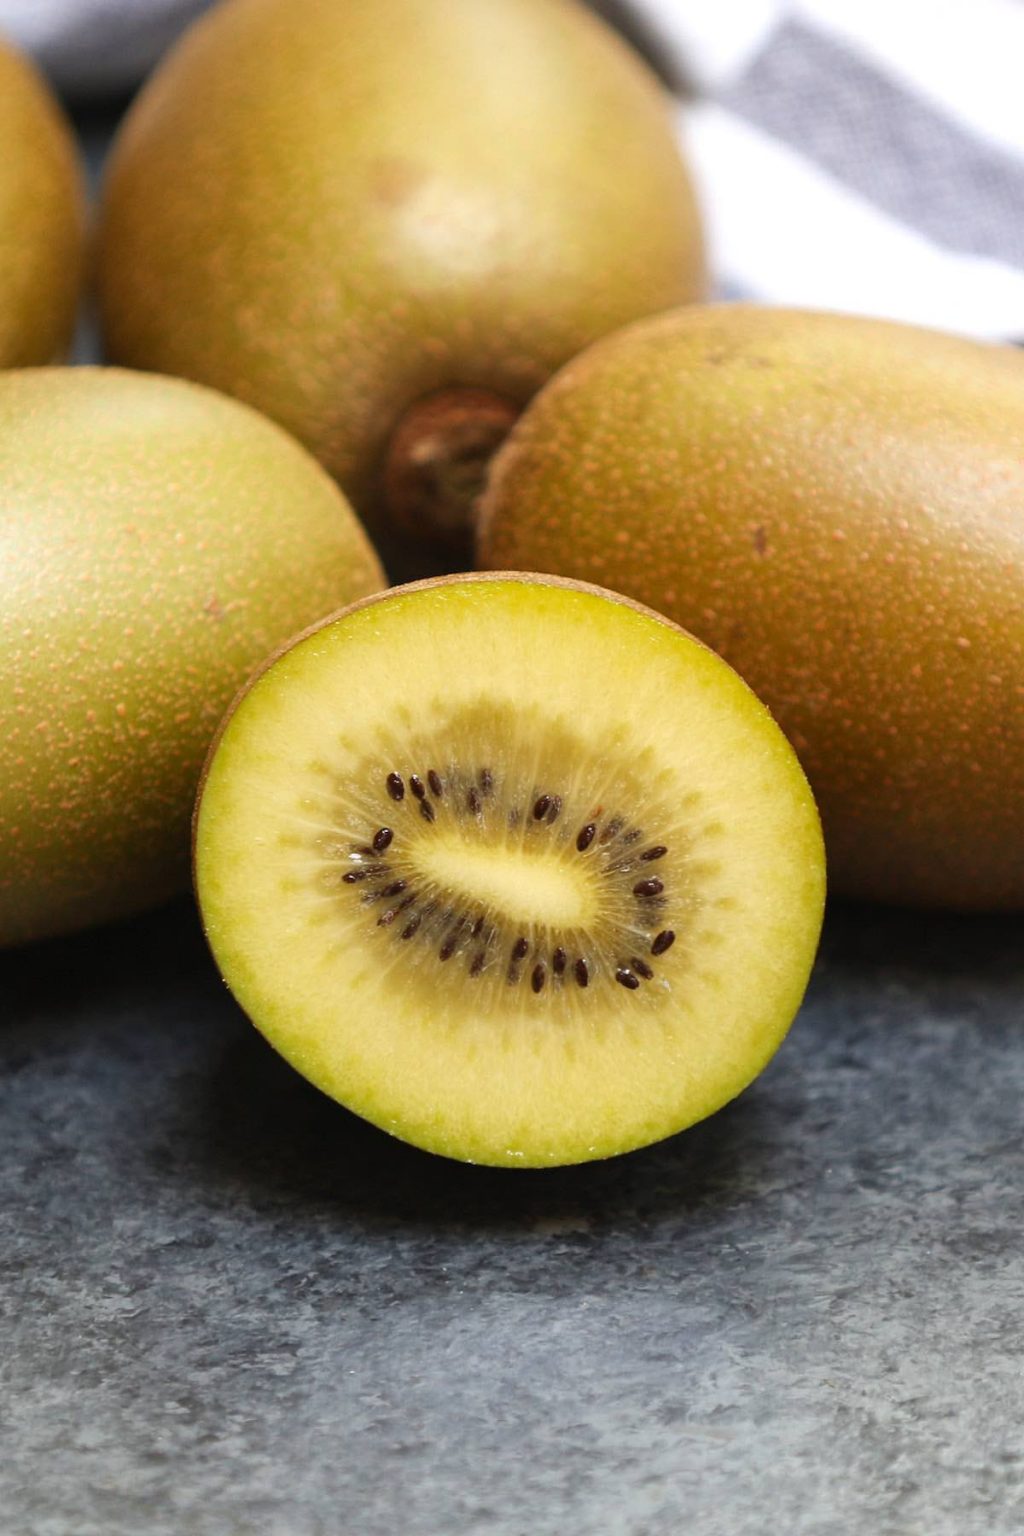 Golden Kiwi: Benefits + How to Cut and Eat - TipBuzz